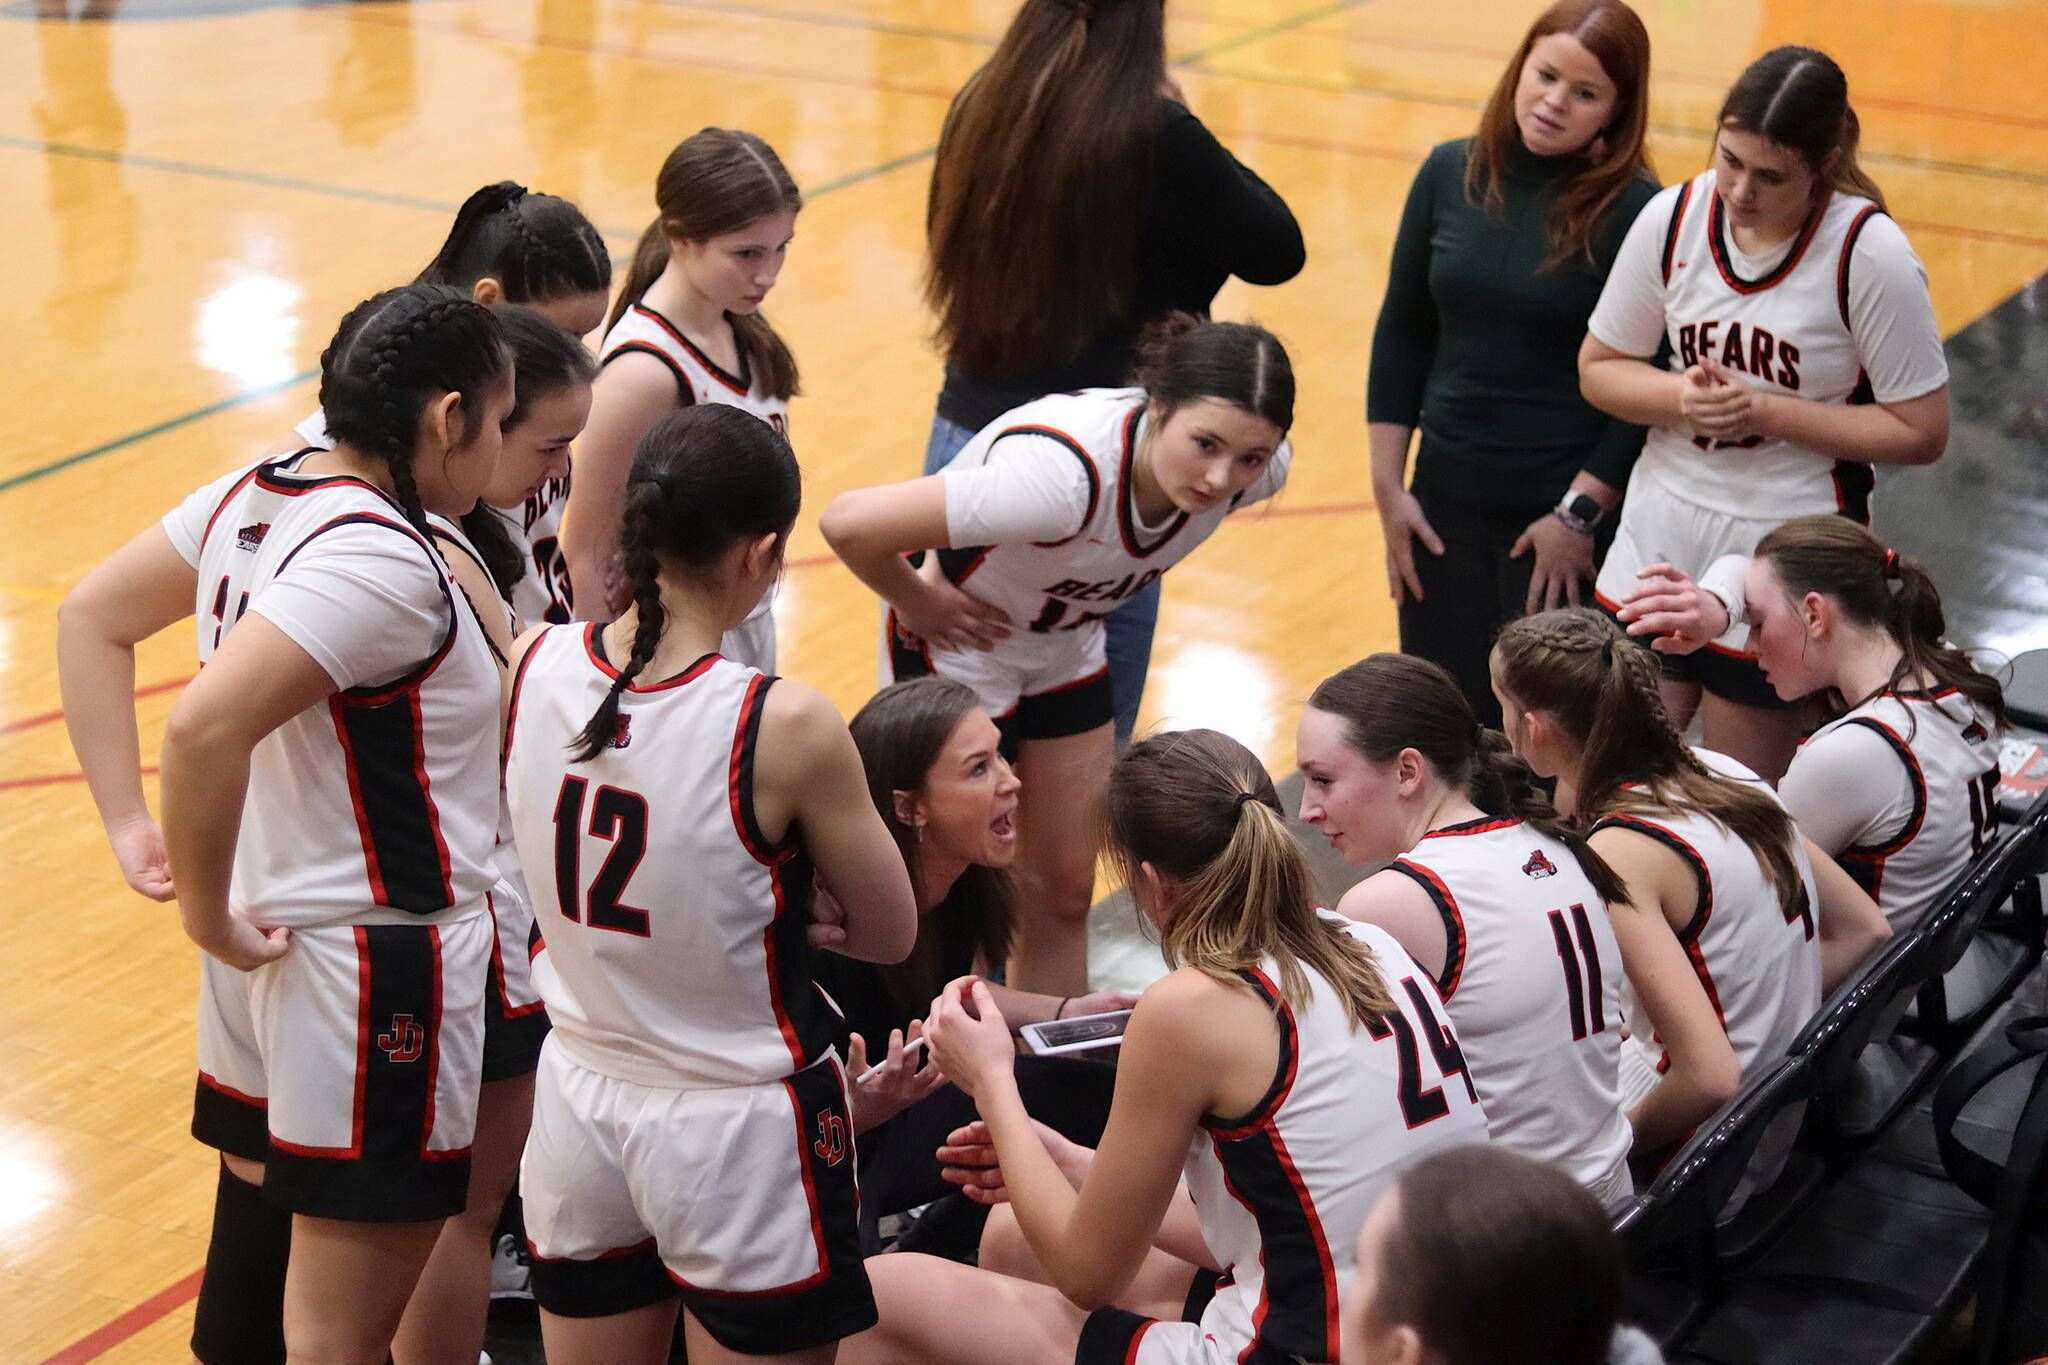 Tanya Nizich, head coach of Juneau-Douglas High School: Yadaa.at Kalé’s girls’ basketball team, gives instructions to players during the closing minutes of a game against Ketchikan High School on Jan. 6 at JDHS. (Mark Sabbatini / Juneau Empire file photo)